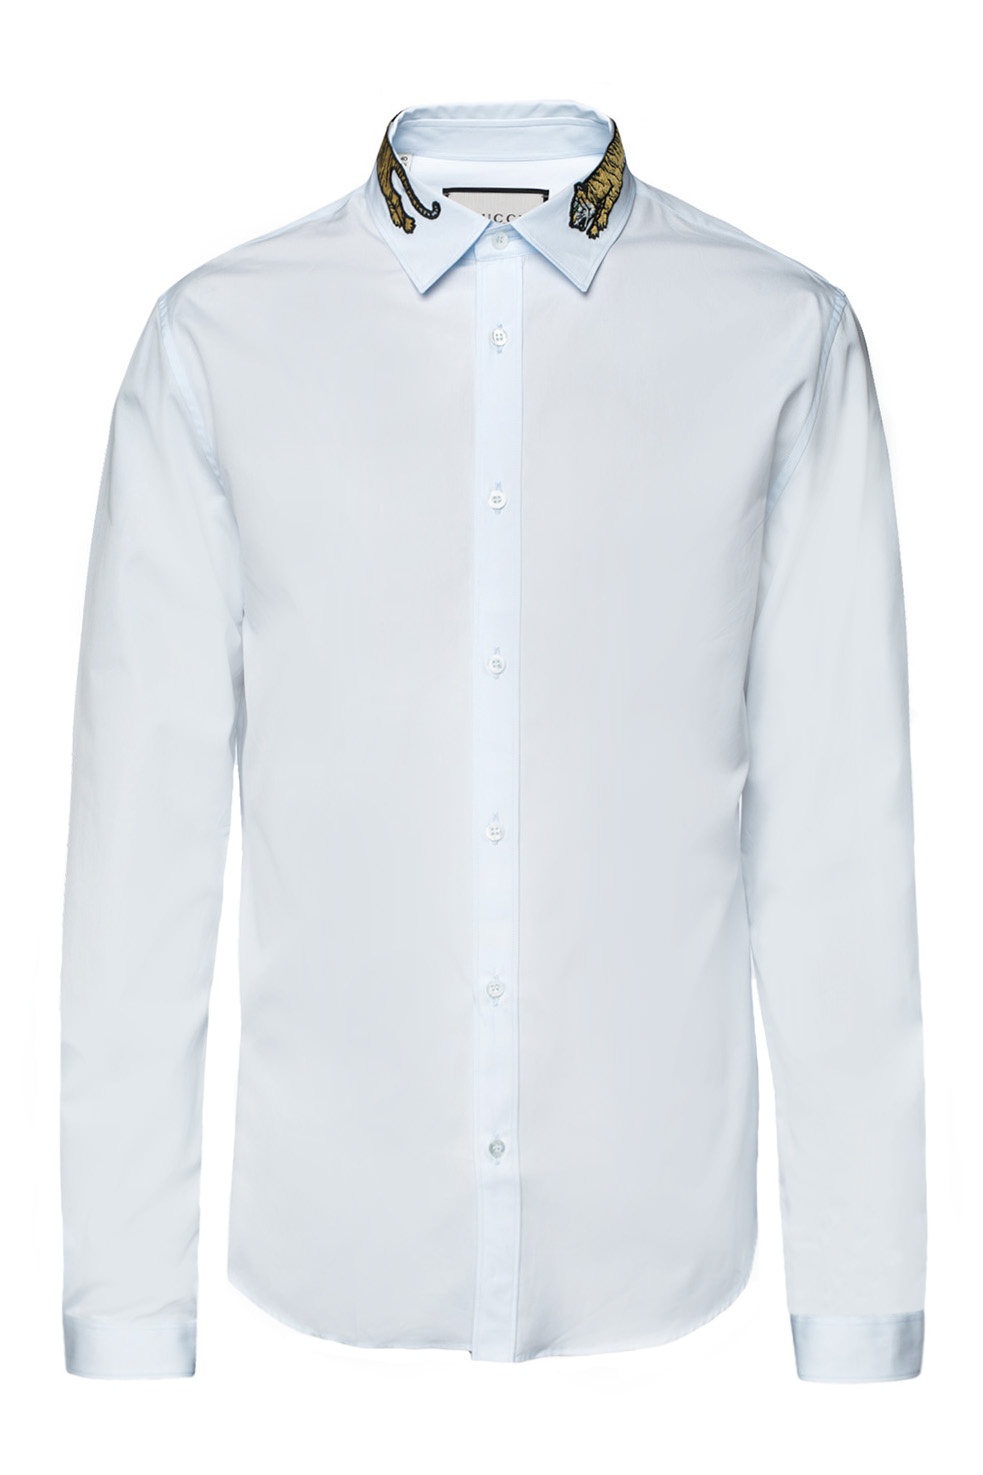 Gucci Embroidered Tiger Collar Duke Shirt in White for Men